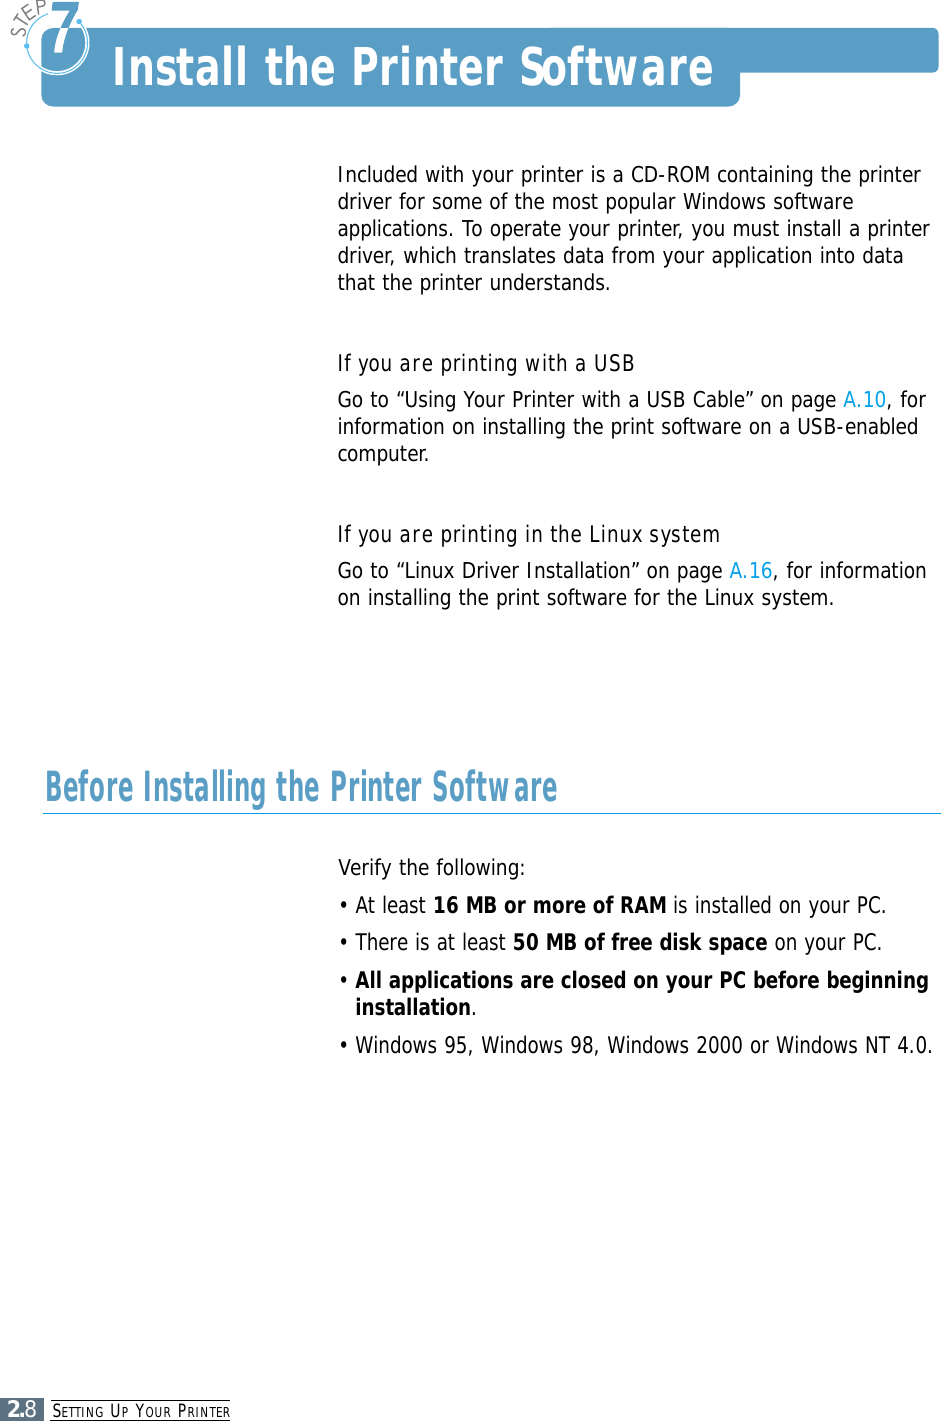 SETTING UPYOUR PRINTER2.8Included with your printer is a CD-ROM containing the printerdriver for some of the most popular Windows softwareapplications. To operate your printer, you must install a printerdriver, which translates data from your application into datathat the printer understands.If you are printing with a USBGo to “Using Your Printer with a USB Cable” on page A.10, forinformation on installing the print software on a USB-enabledcomputer.If you are printing in the Linux systemGo to “Linux Driver Installation” on page A.16, for informationon installing the print software for the Linux system.Install the Printer SoftwareVerify the following:• At least 16 MB or more of RAM is installed on your PC. • There is at least 50 MB of free disk space on your PC.• All applications are closed on your PC before beginninginstallation.• Windows 95, Windows 98, Windows 2000 or Windows NT 4.0.Before Installing the Printer Software